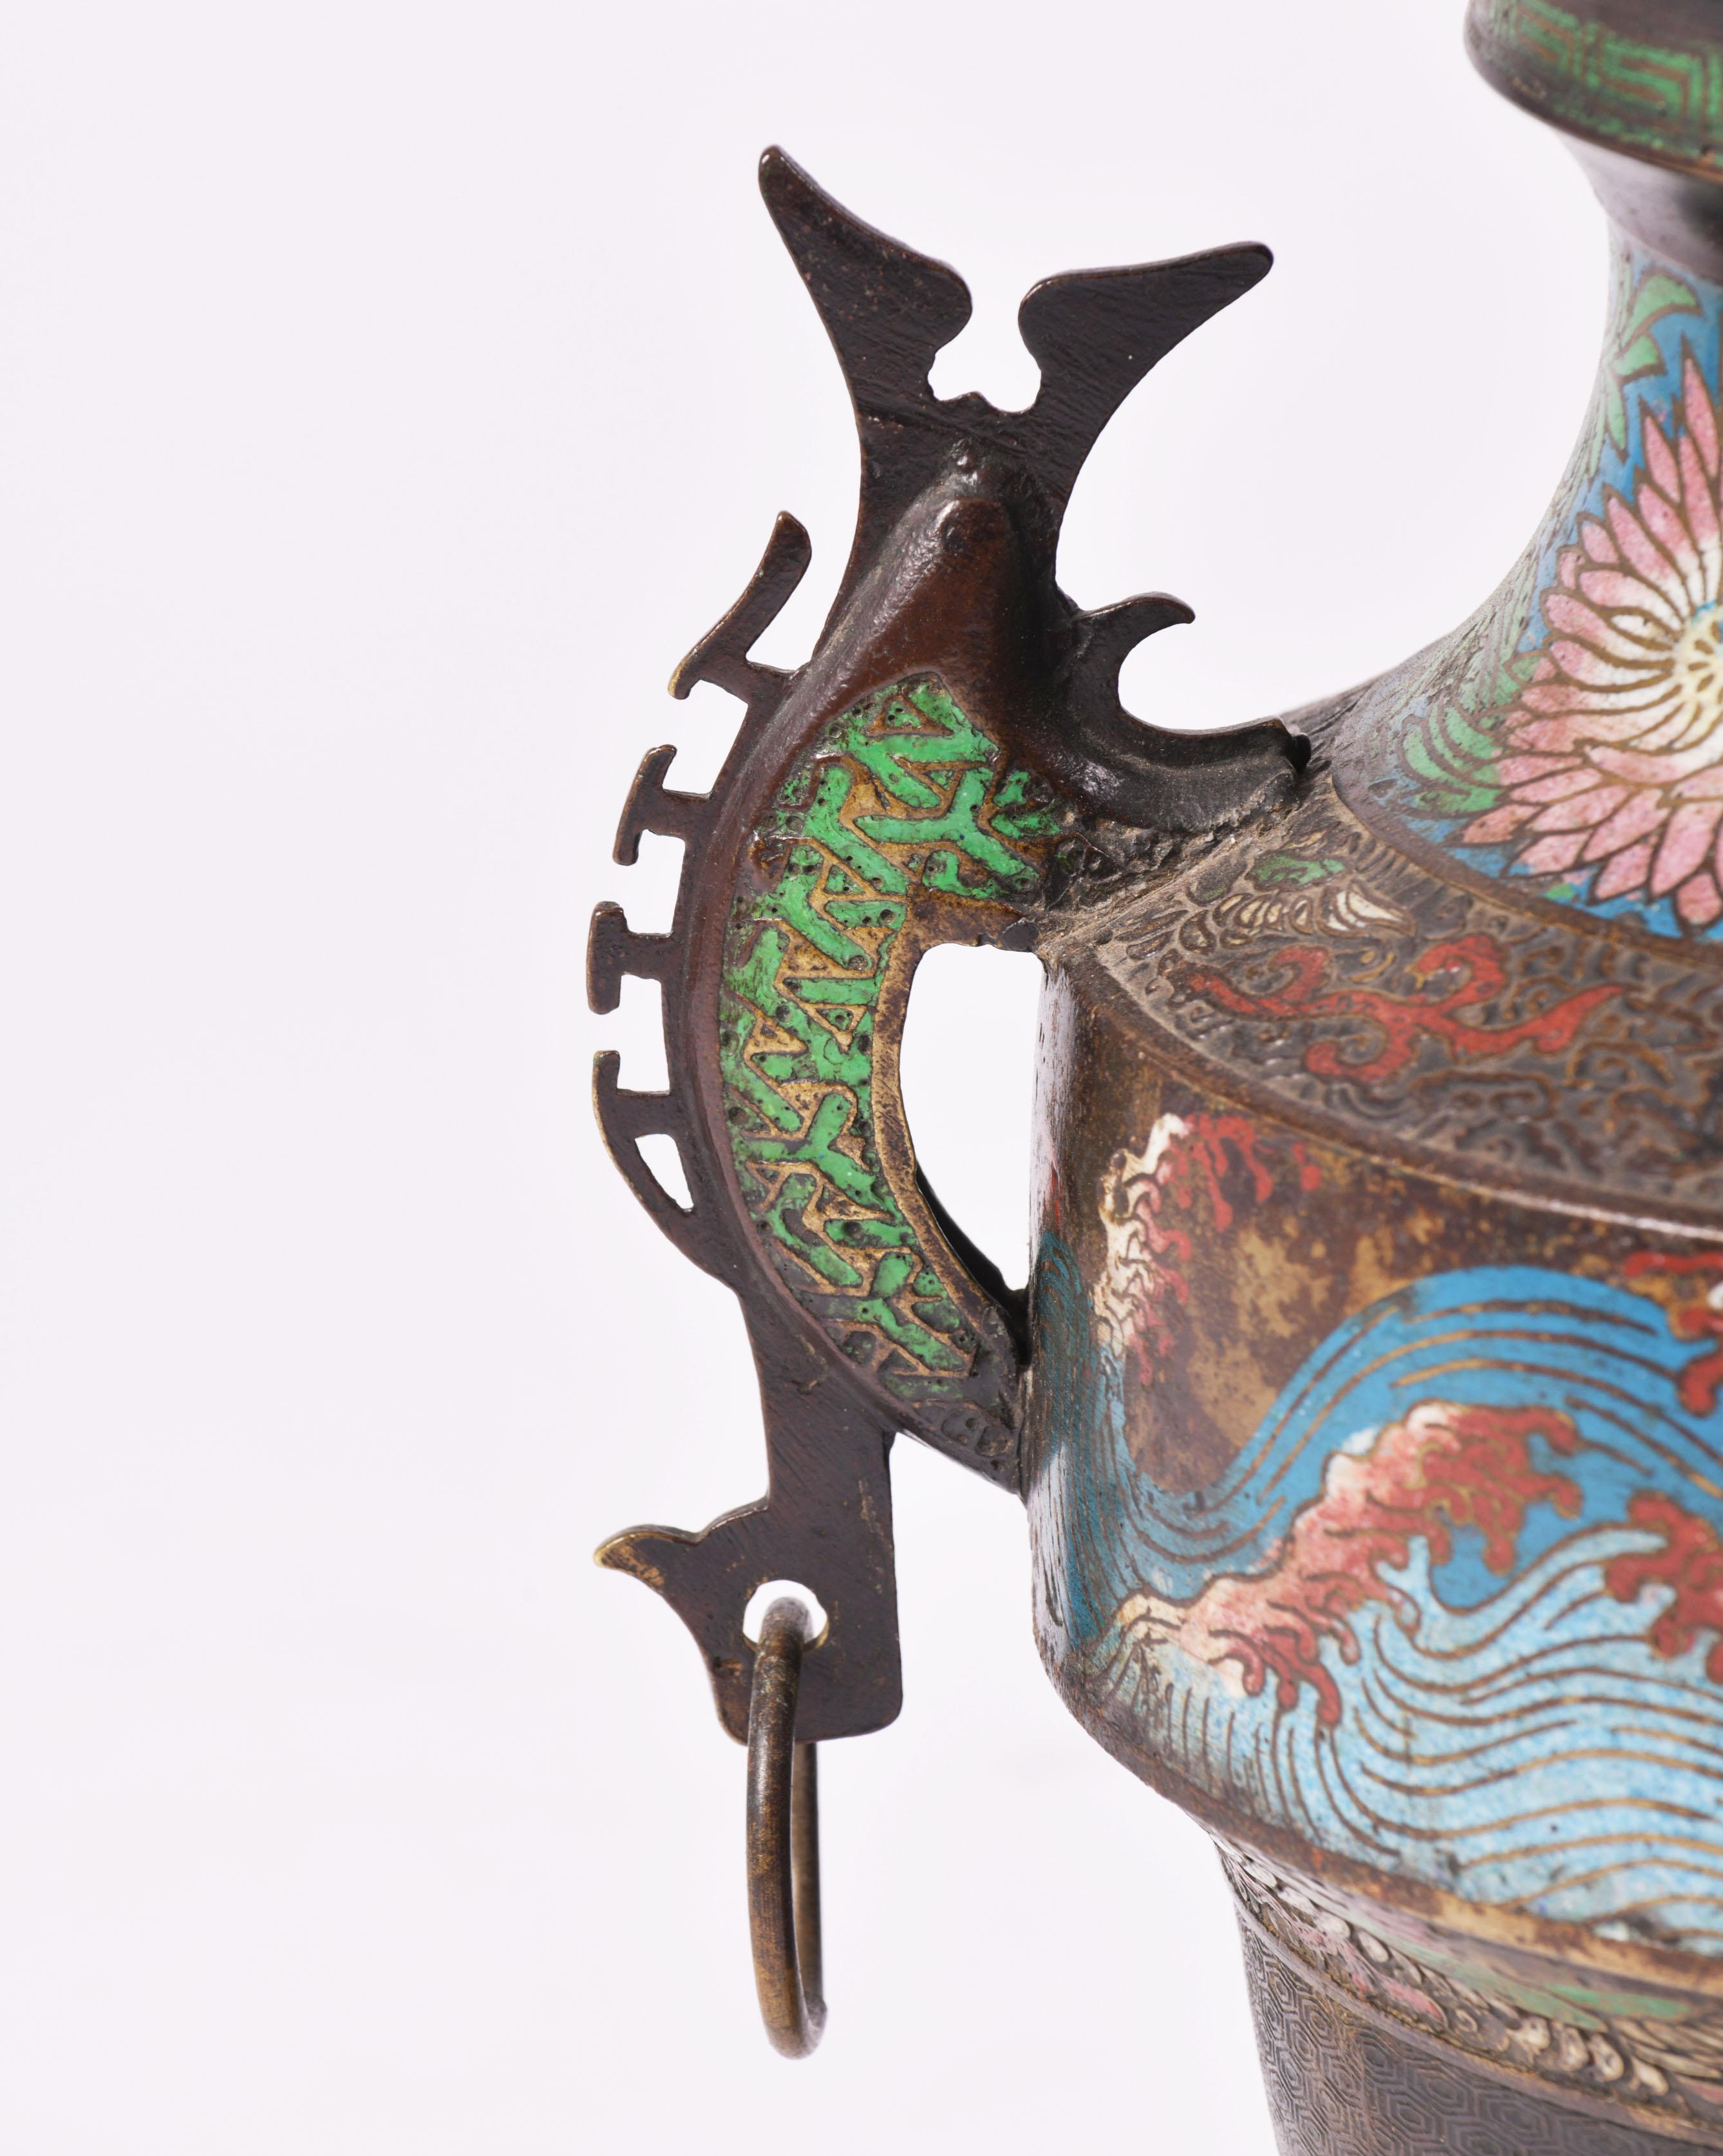 This very striking mid-20th century Japanese enameled bronze censer features an ornately enamel painted design of stylized flowers and mountain scenes. It has attractive cut work in both the base and the top, with a foo dog finial. This enameled